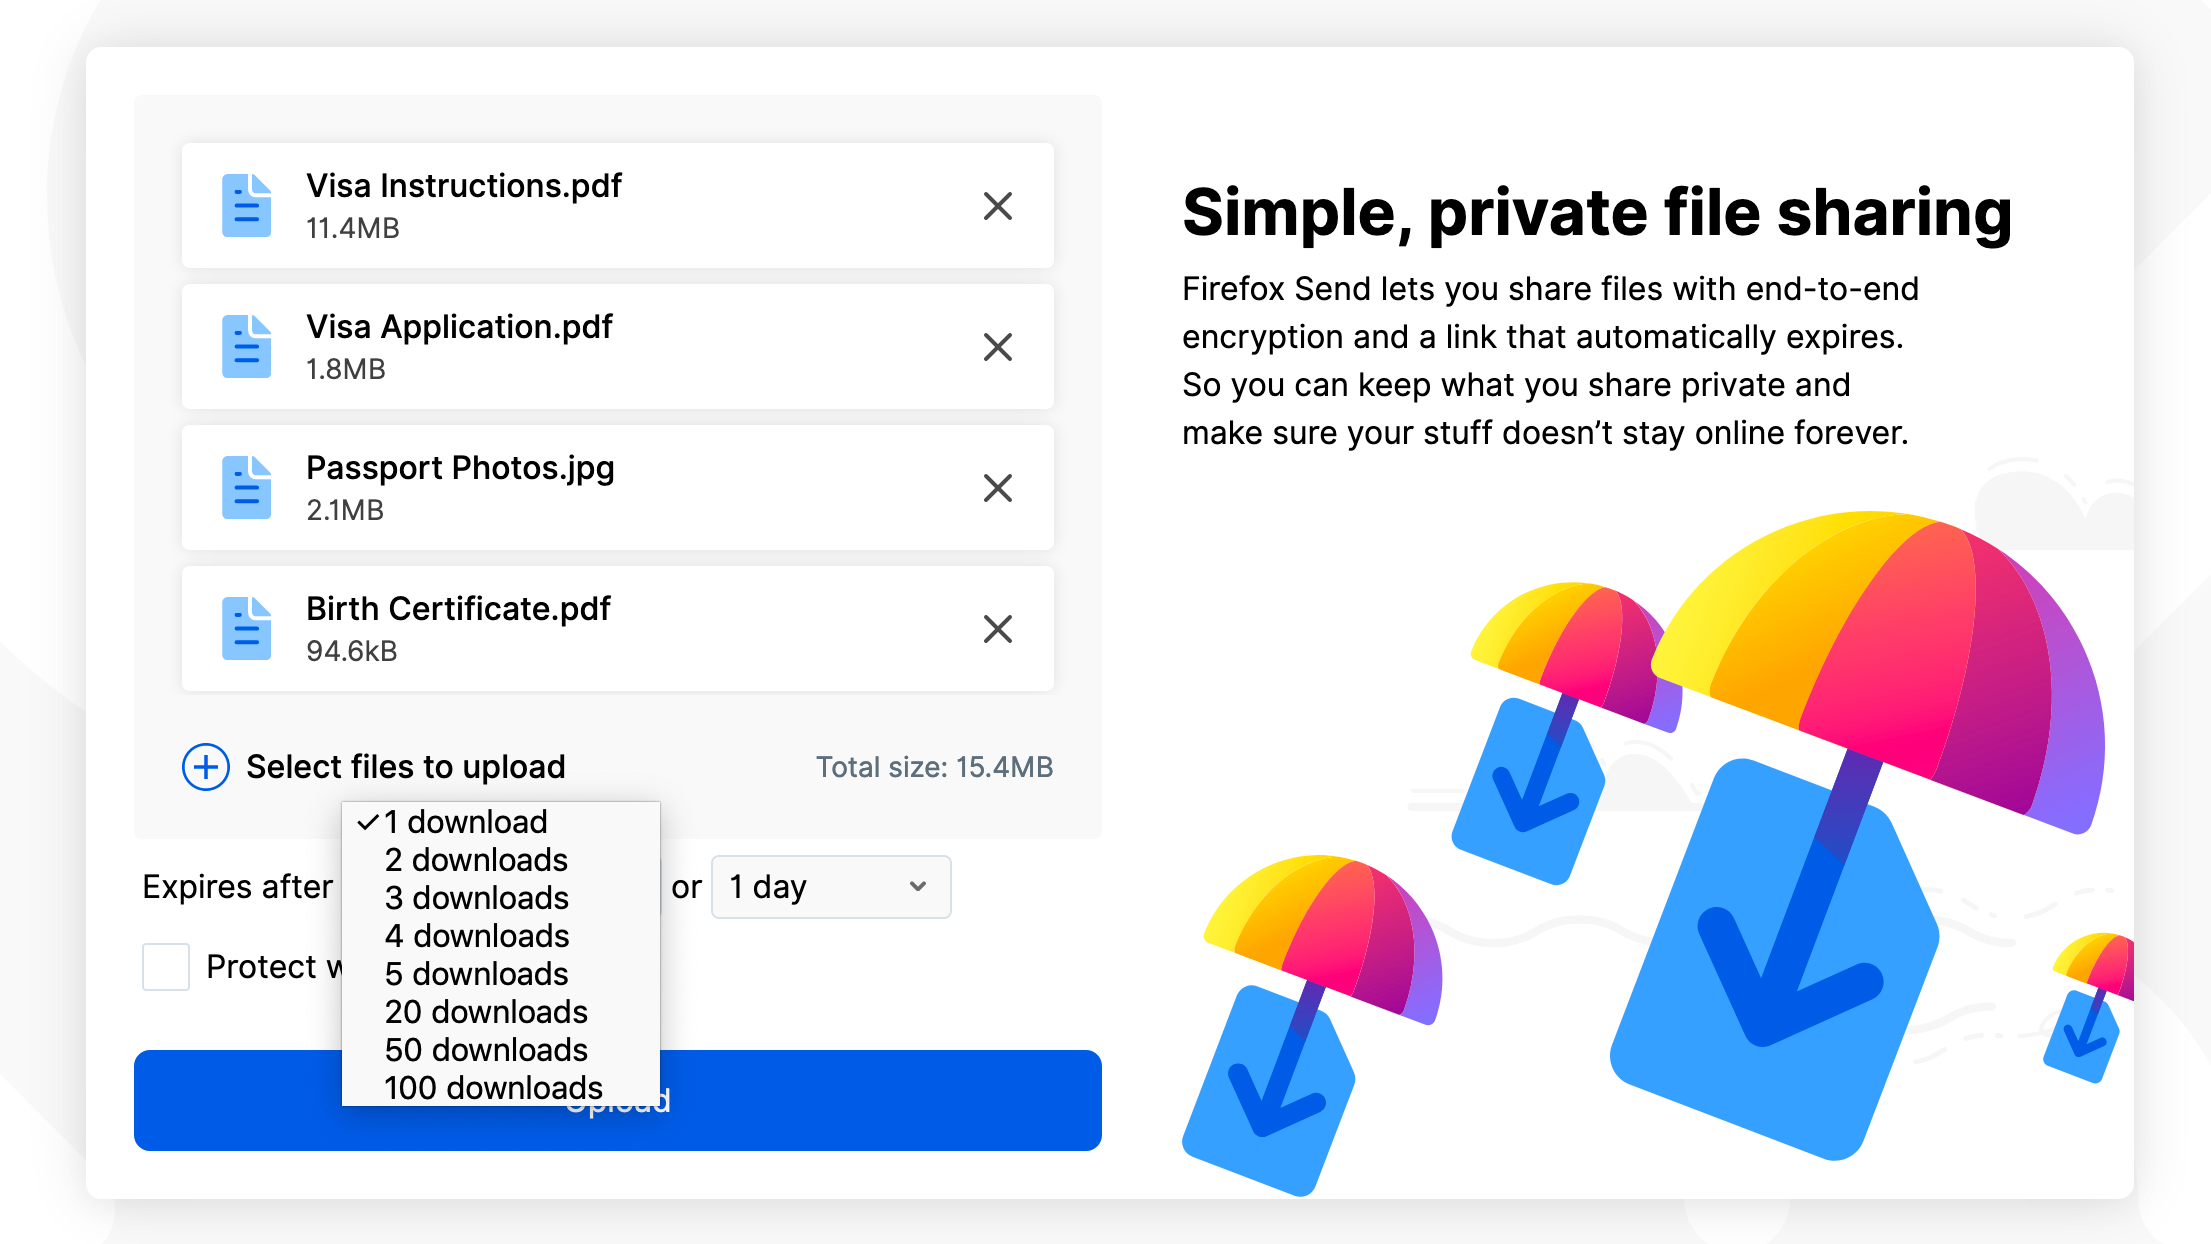 Share Up To 2.5GB Of Files At Once (For Free) With Firefox Send